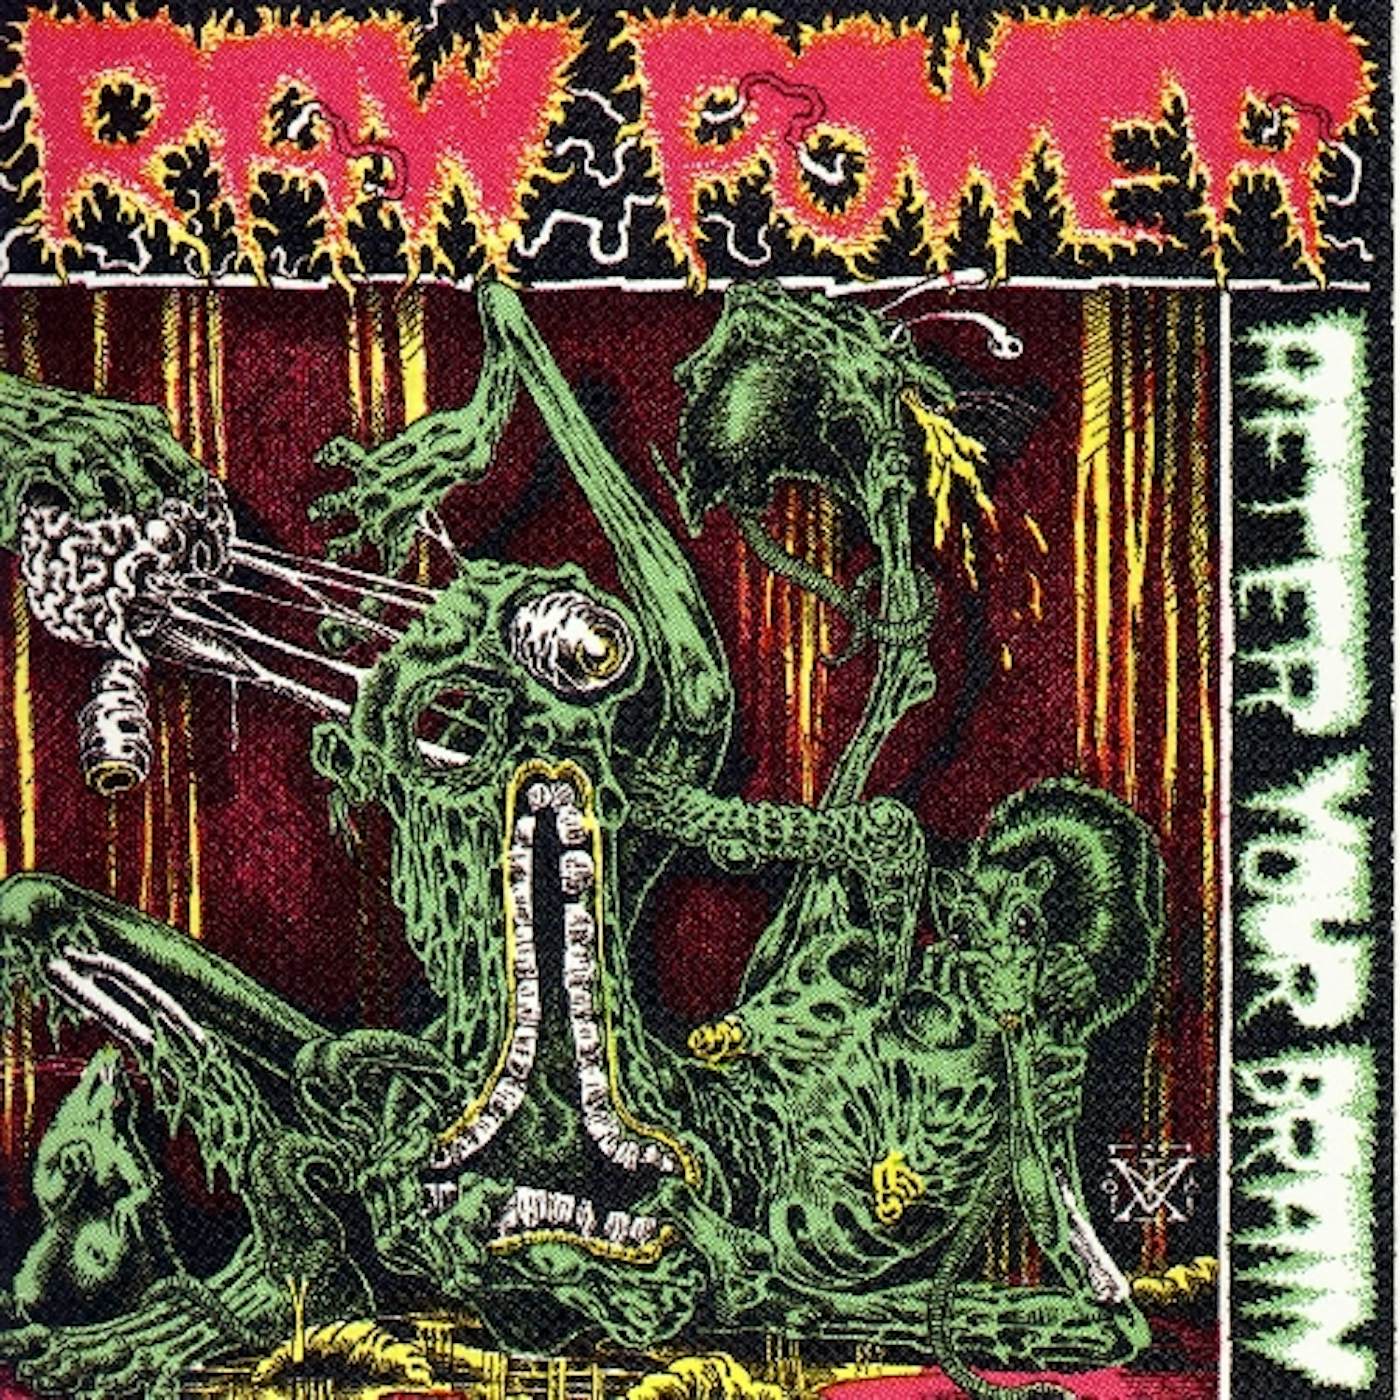 Raw Power AFTER YOUR BRAIN Vinyl Record